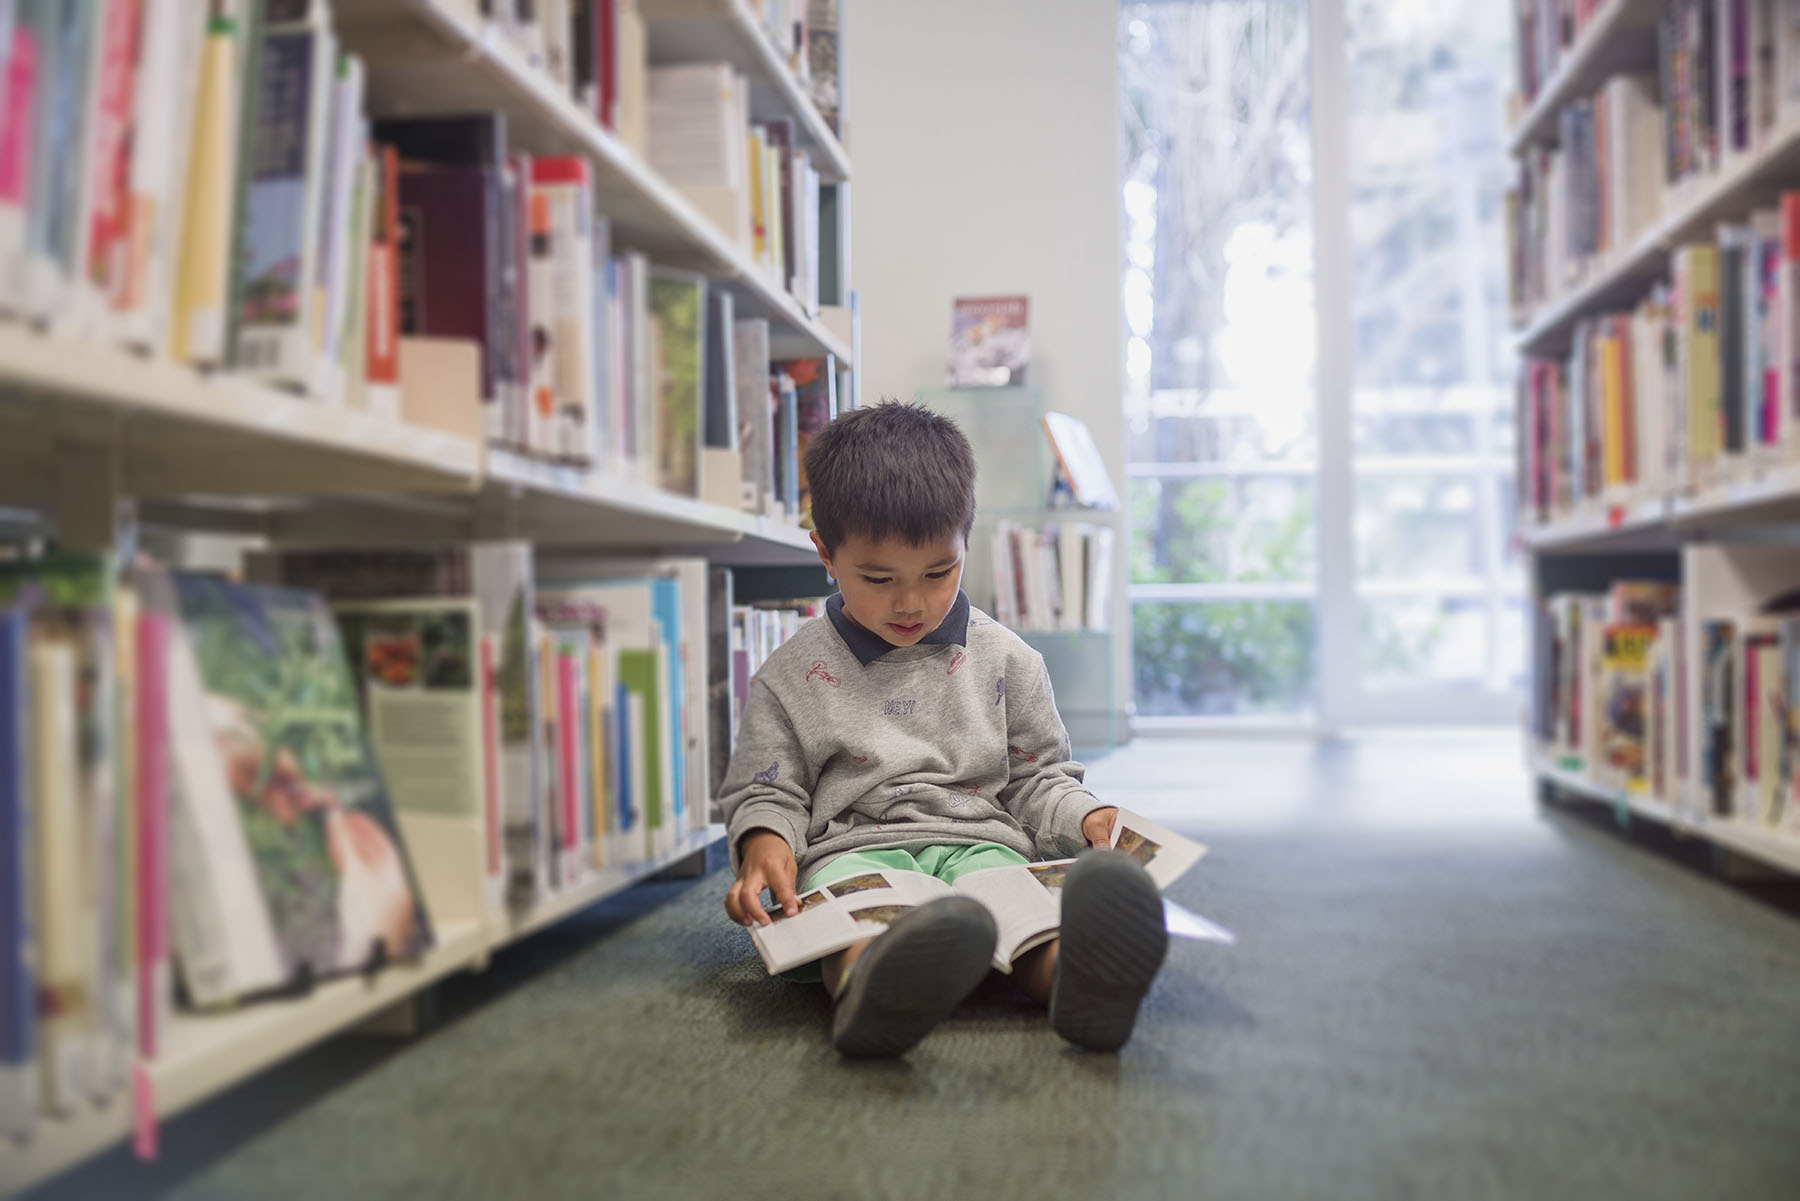 Child reading a book in the library. Image: Nazar Abbas Photography/Getty